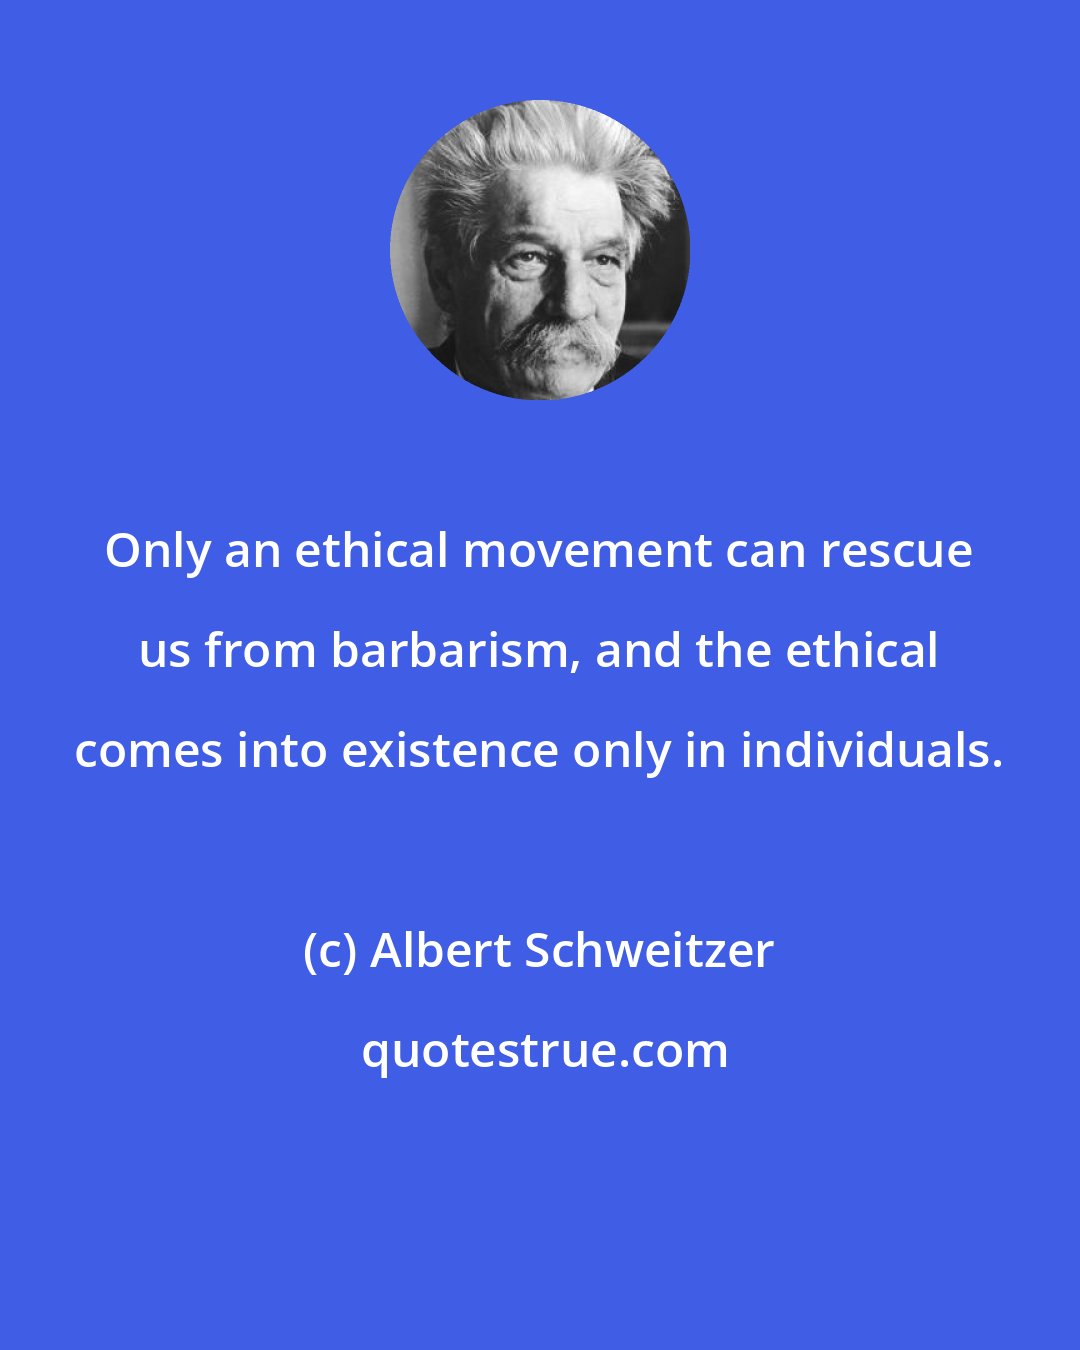 Albert Schweitzer: Only an ethical movement can rescue us from barbarism, and the ethical comes into existence only in individuals.